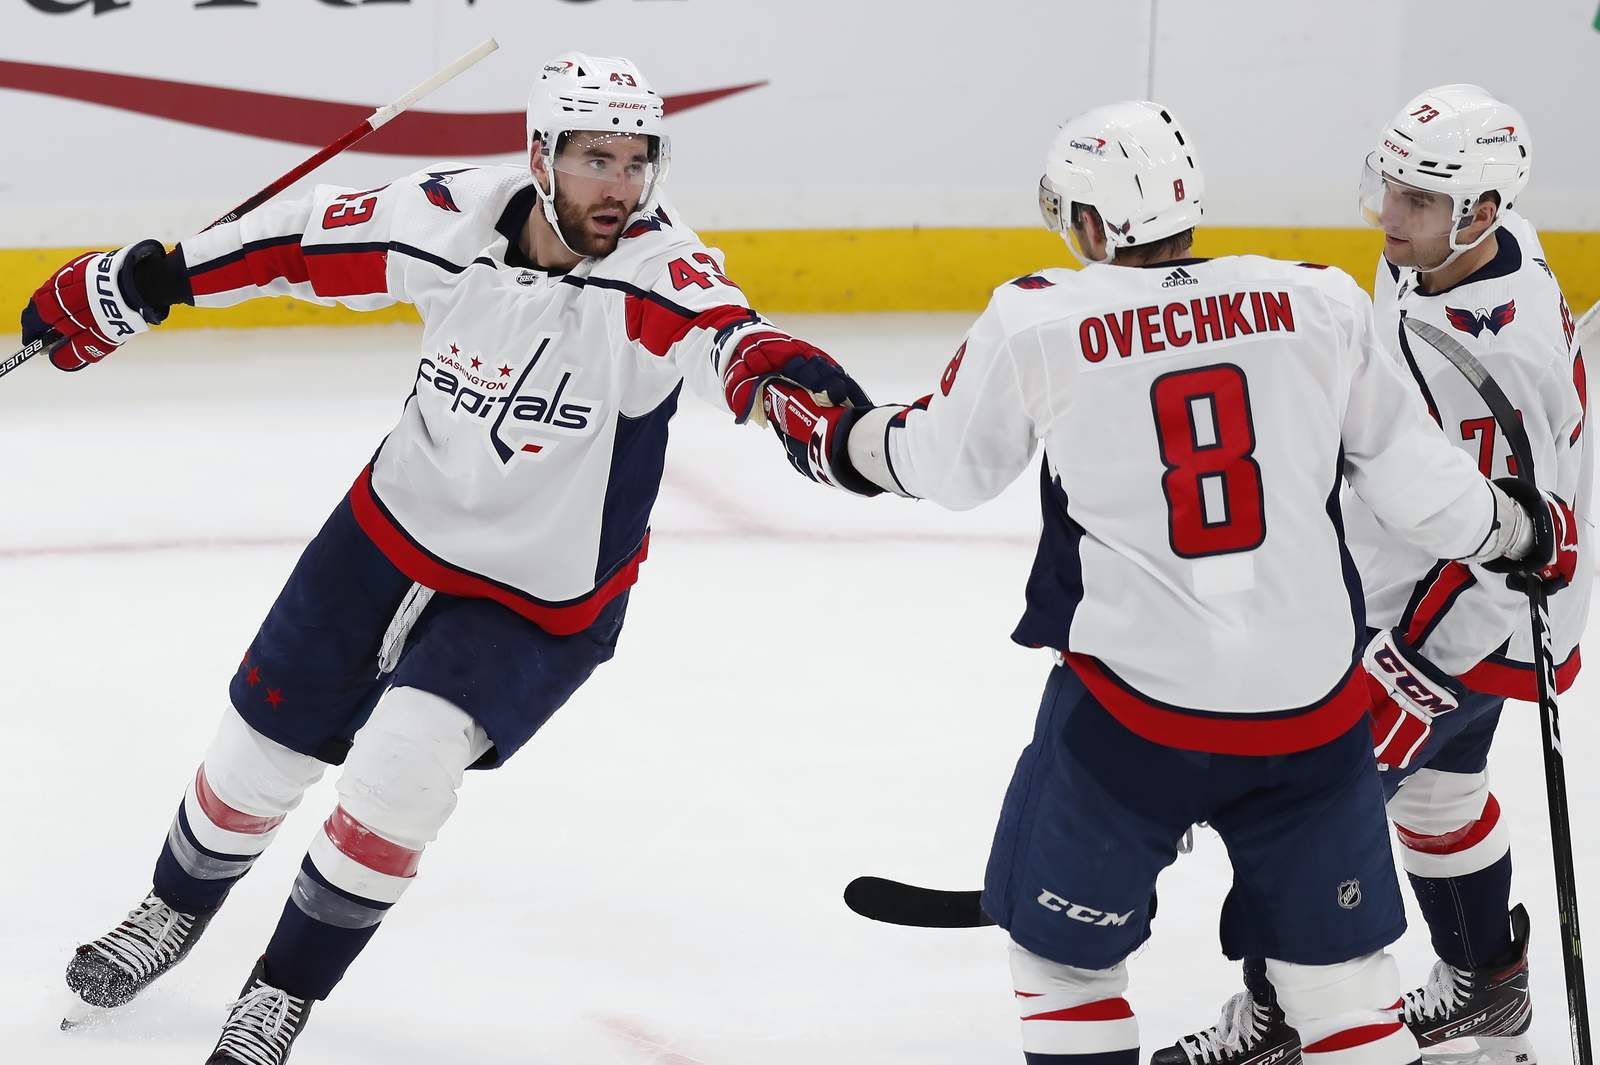 Capitals captain Alex Ovechkin signs 5-year, $47.5M extension